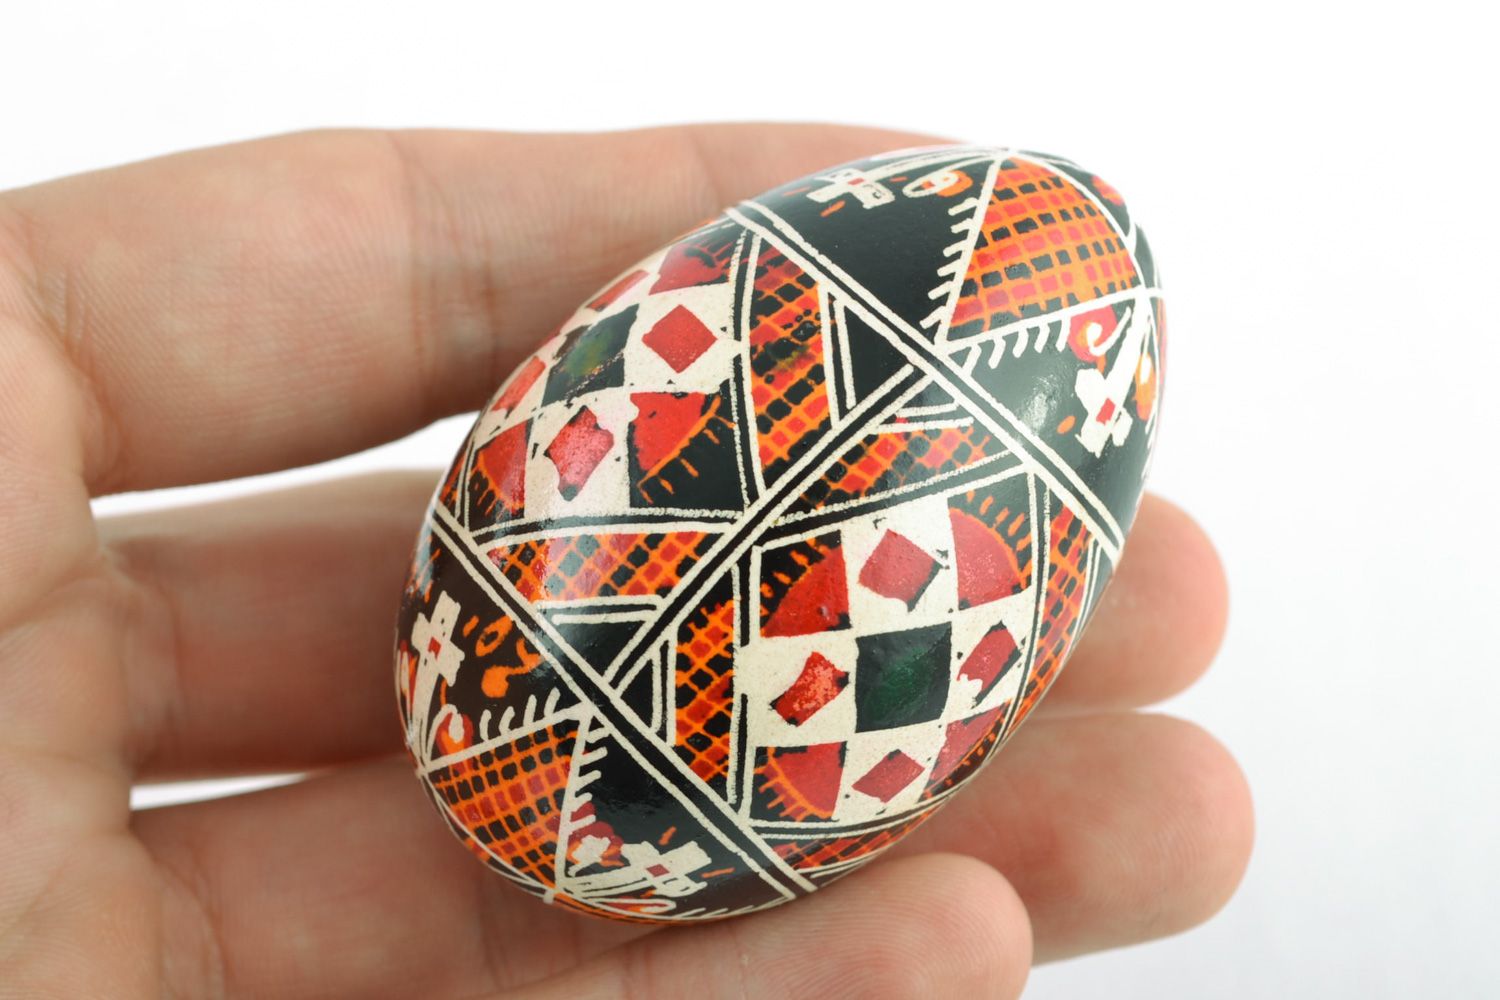 Homemade traditional colorful Easter egg painted with wax and aniline dyes photo 2